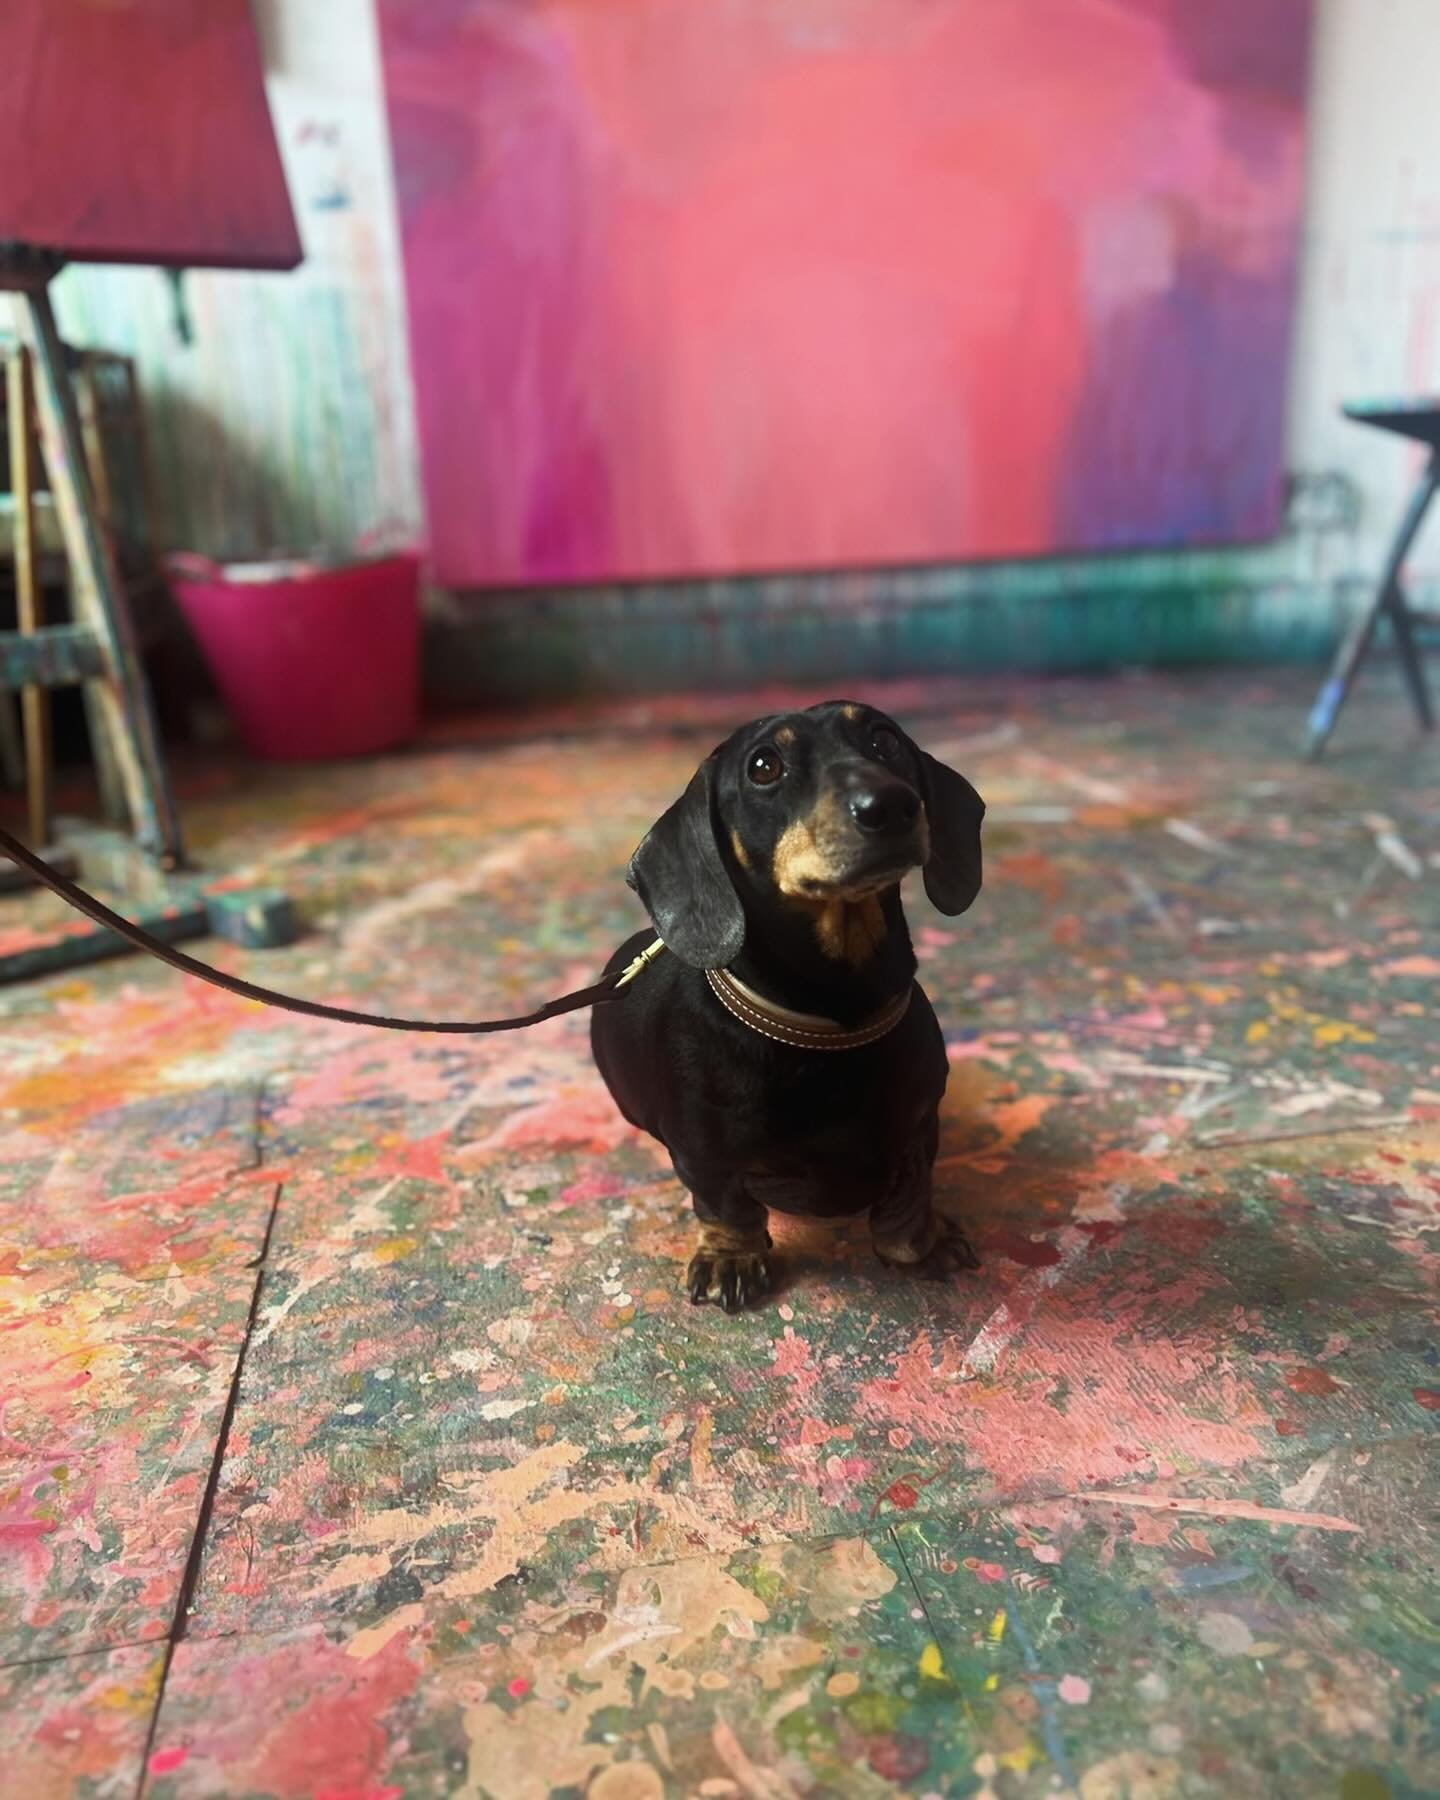 A Cute dog to grab your attention! Ha ! I grew up with a sausage dog called Tikka, so they have a special place in my heart ! 
&bull;
This is my studio floor which gets a lot of attention too! You can visit next month&hellip;the email is going out to